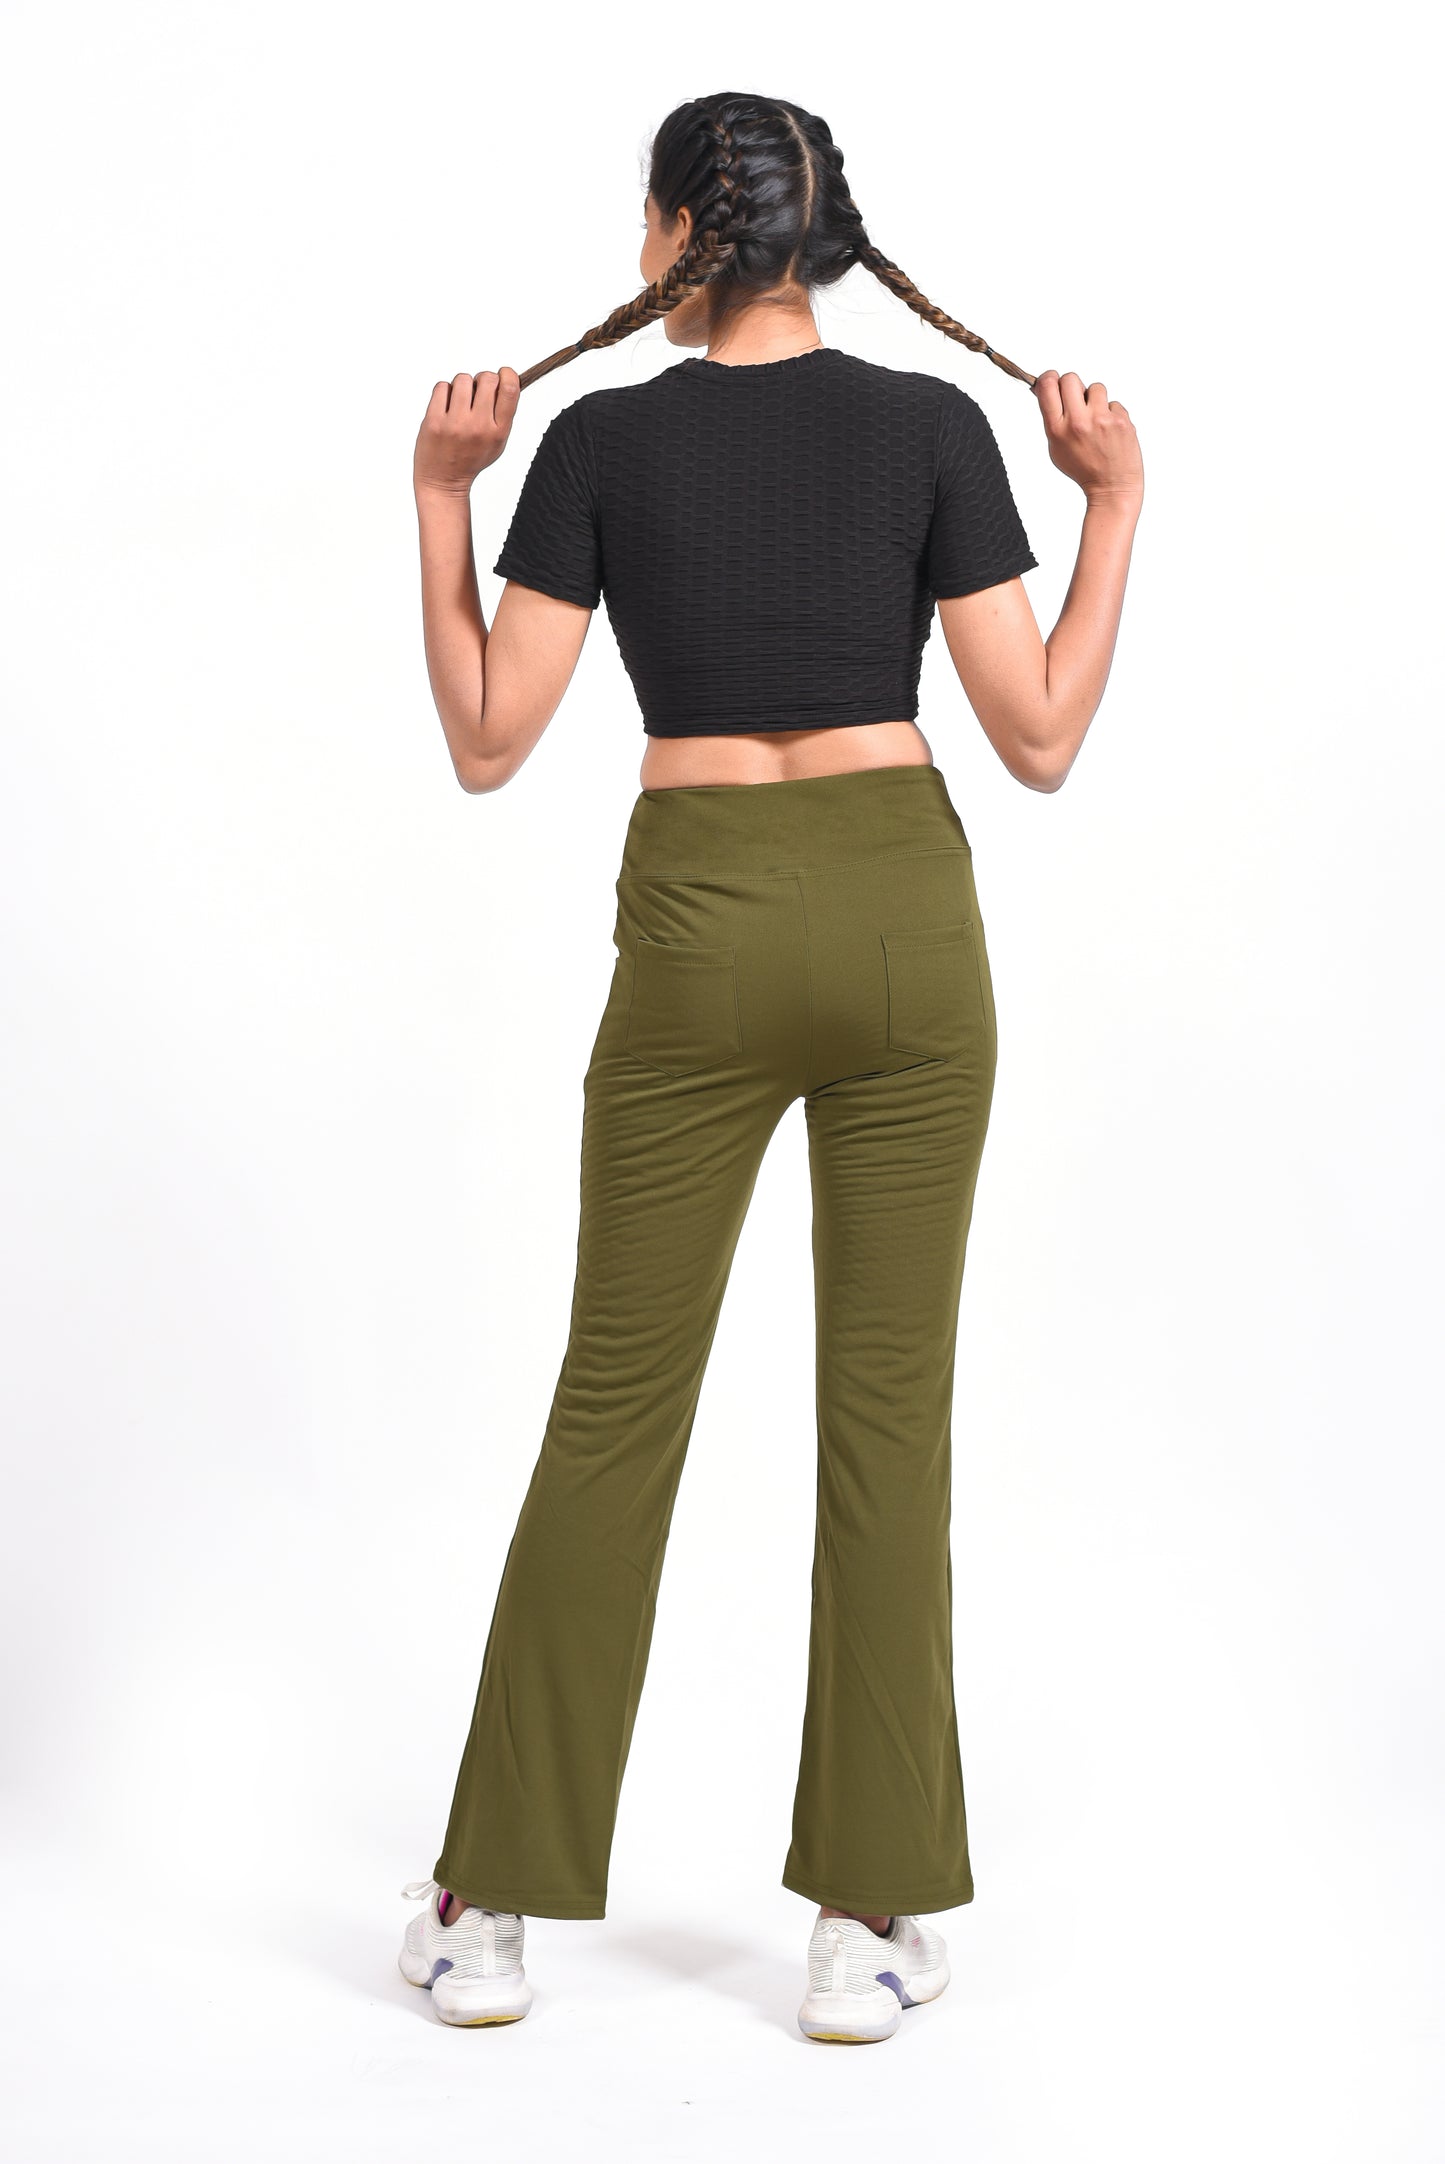 ThusFar Women Velvet Flare Pants Casual Elastic Waist Bell Bottom Comfy  Trousers with Pockets Green at Amazon Women's Clothing store